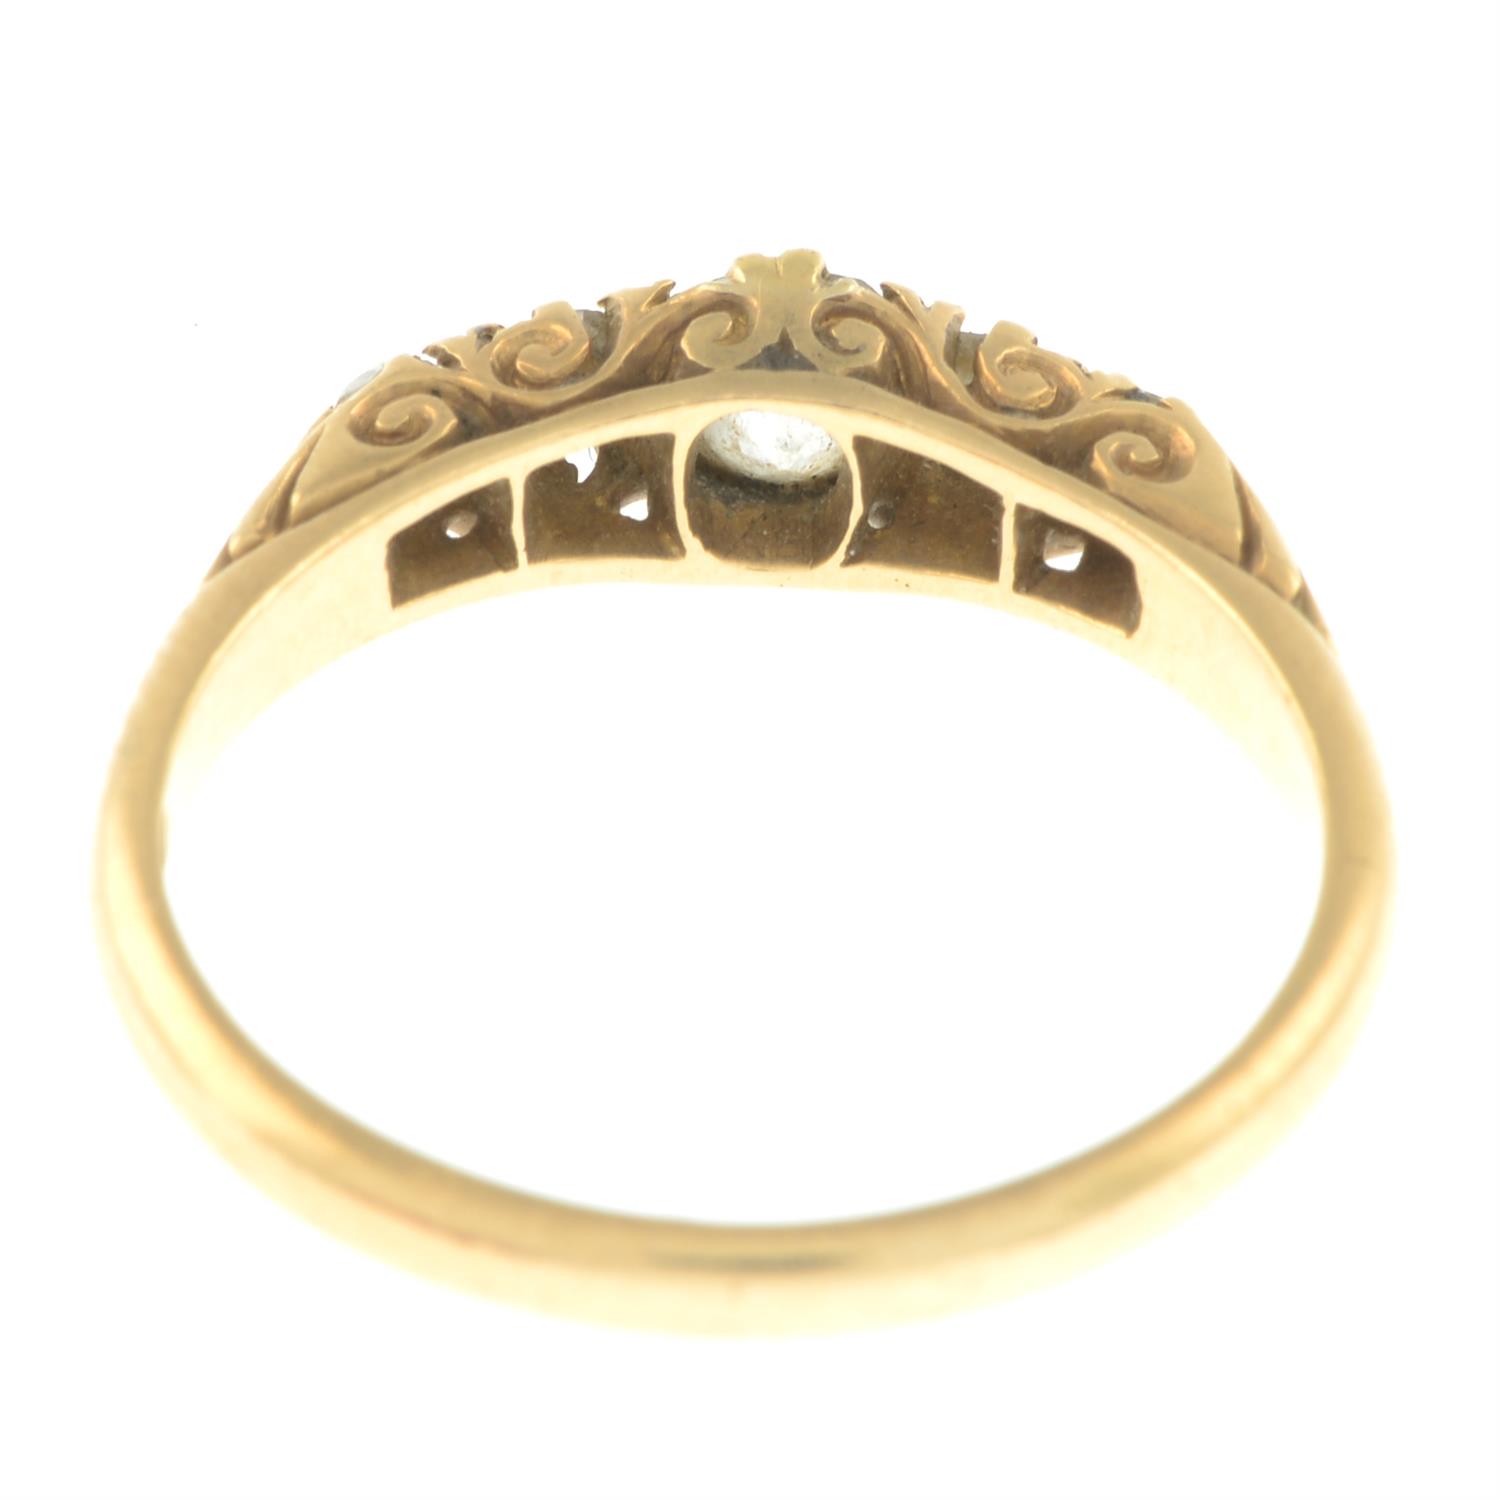 An early 20th century 18ct gold old-cut diamond five-stone ring. - Image 2 of 2